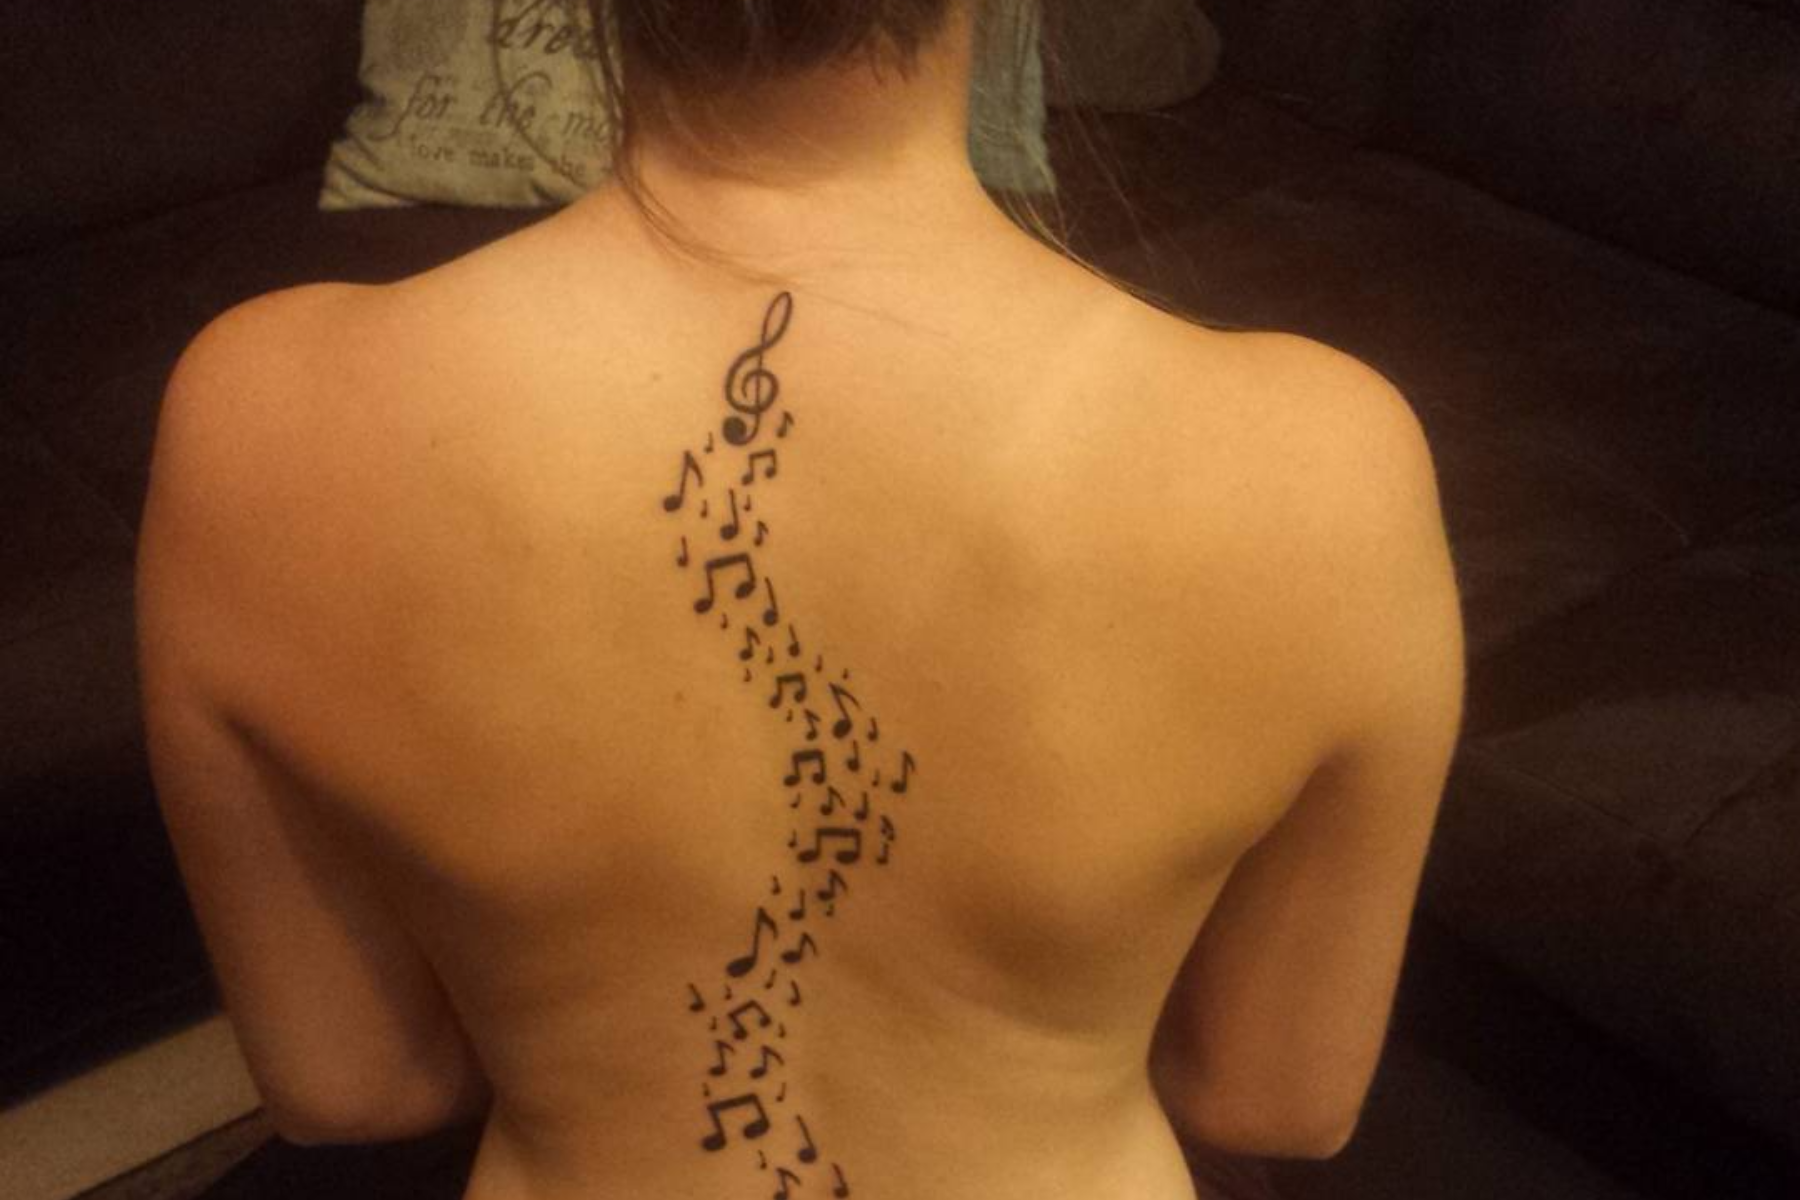 do you have any music related tattoos? - Classical Guitar